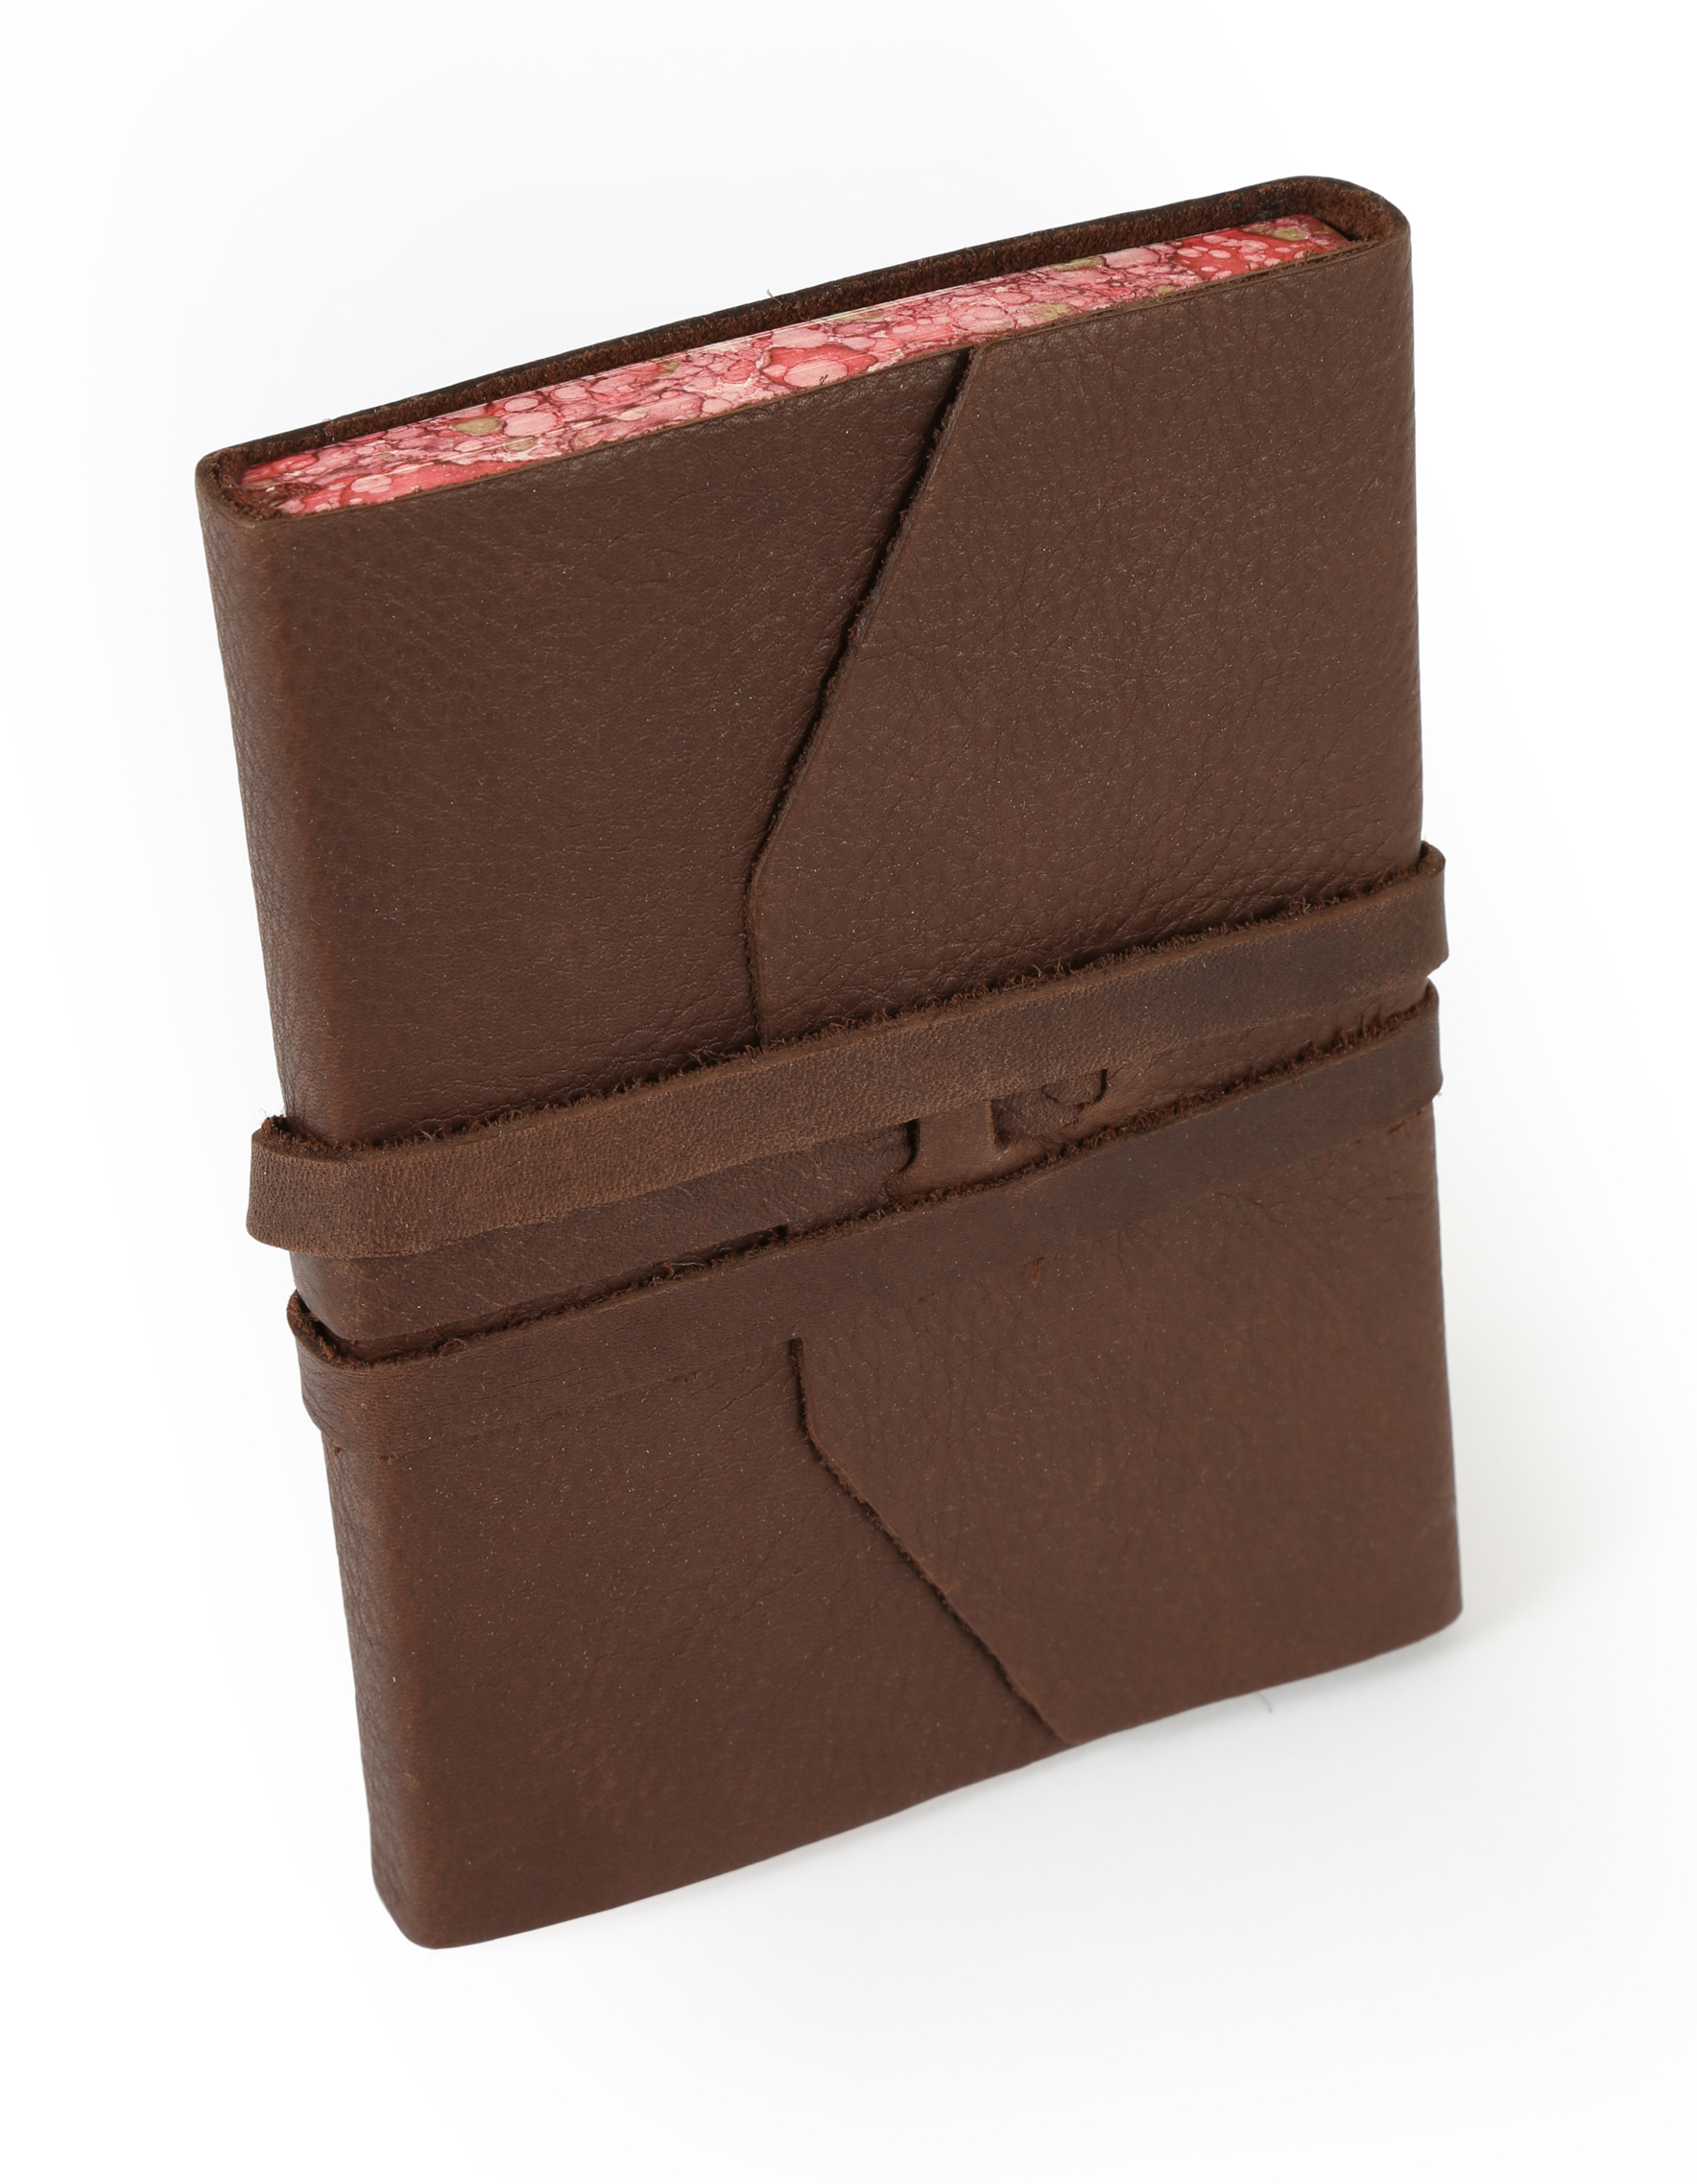 N462/M BRWN/Red - Genuine Leather Journal with Tie